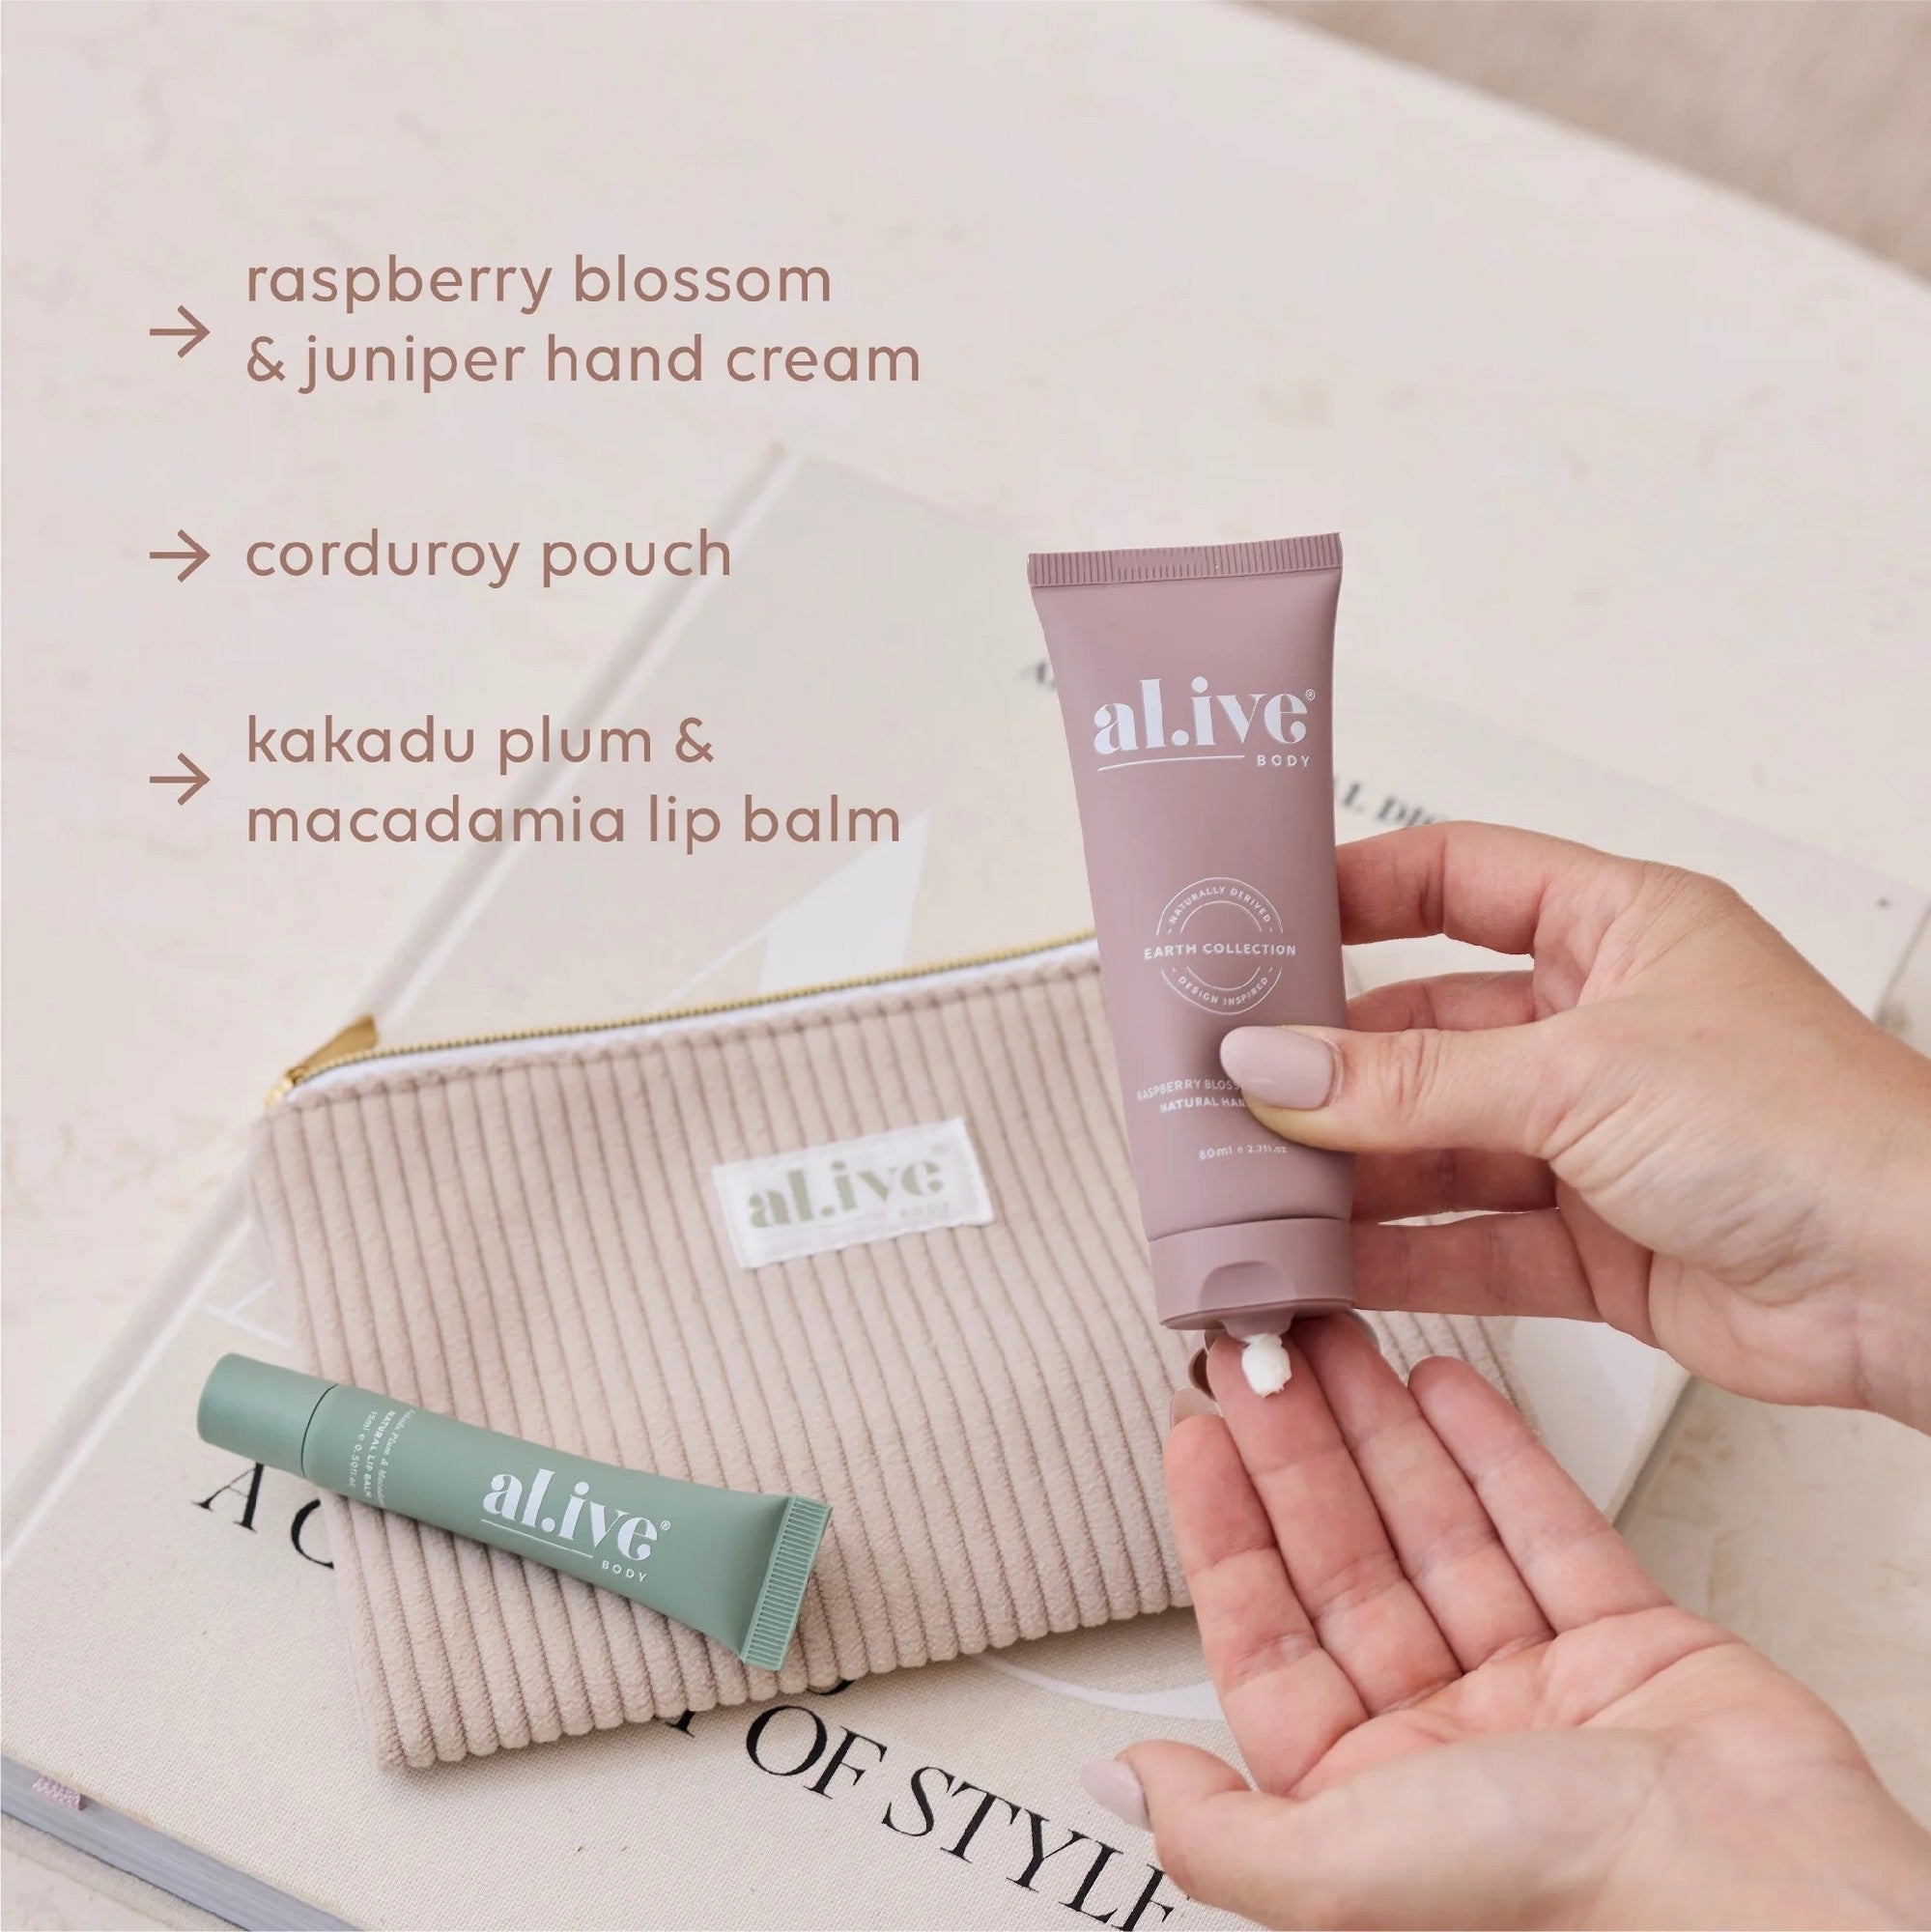 Al.ive Body Lip Gift Set - A Moment To Bloom